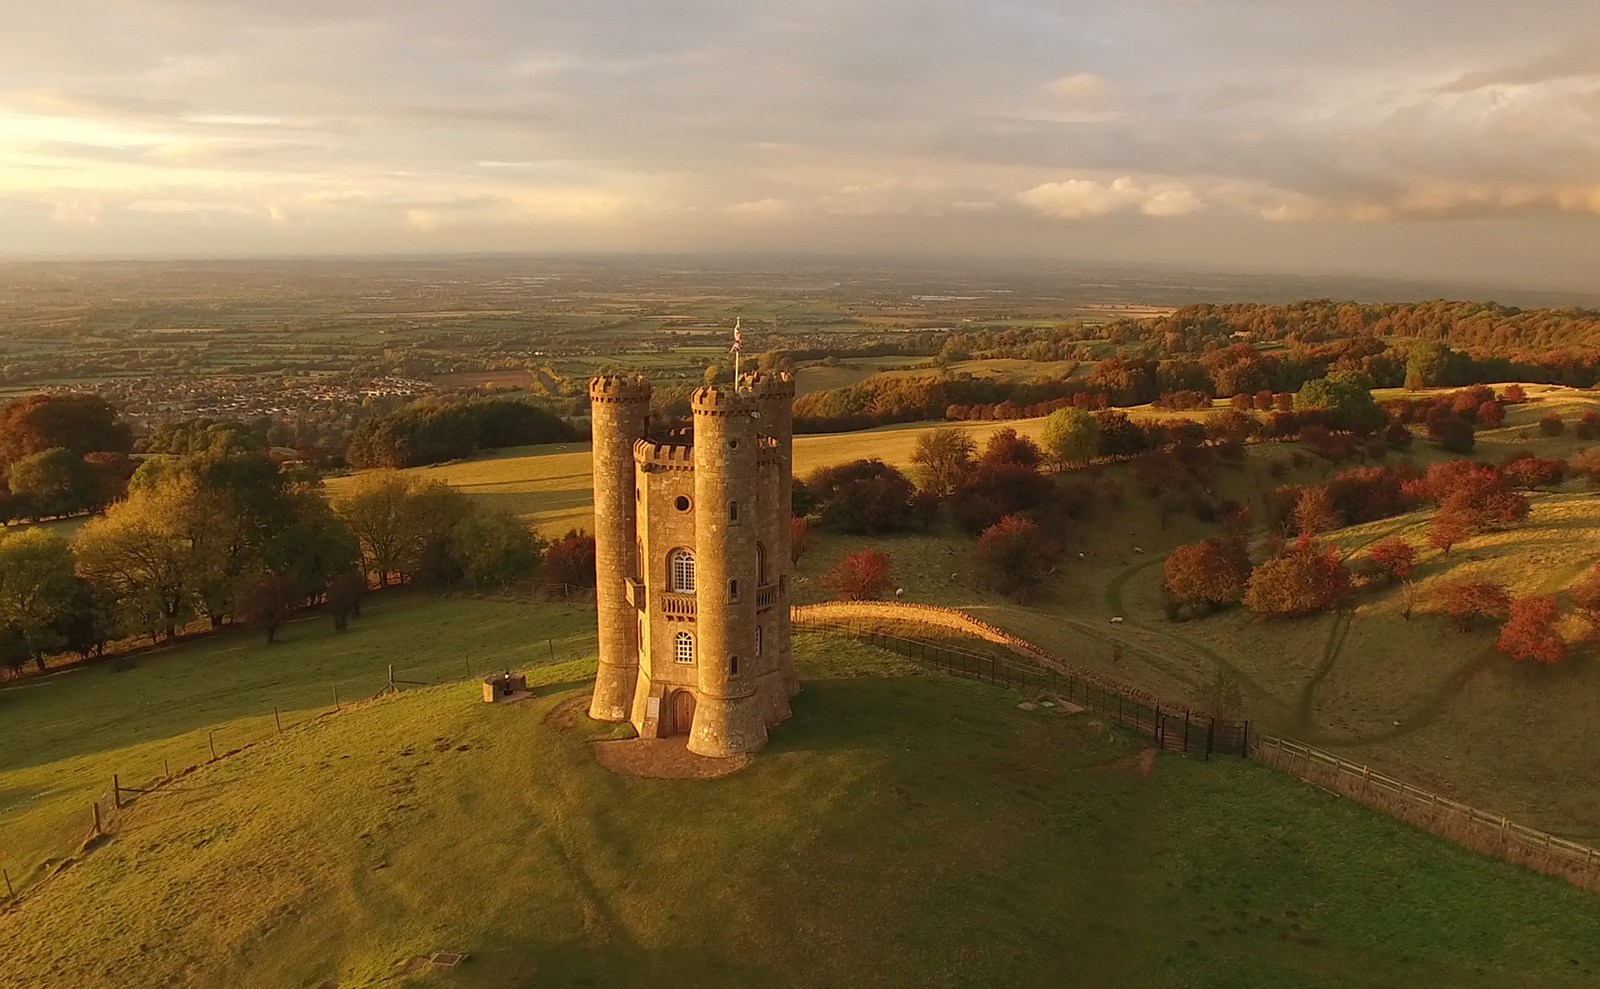 Broadway Tower, Nested Stories, Neil Gaiman, Breads of the World & More: Endnotes 12 January